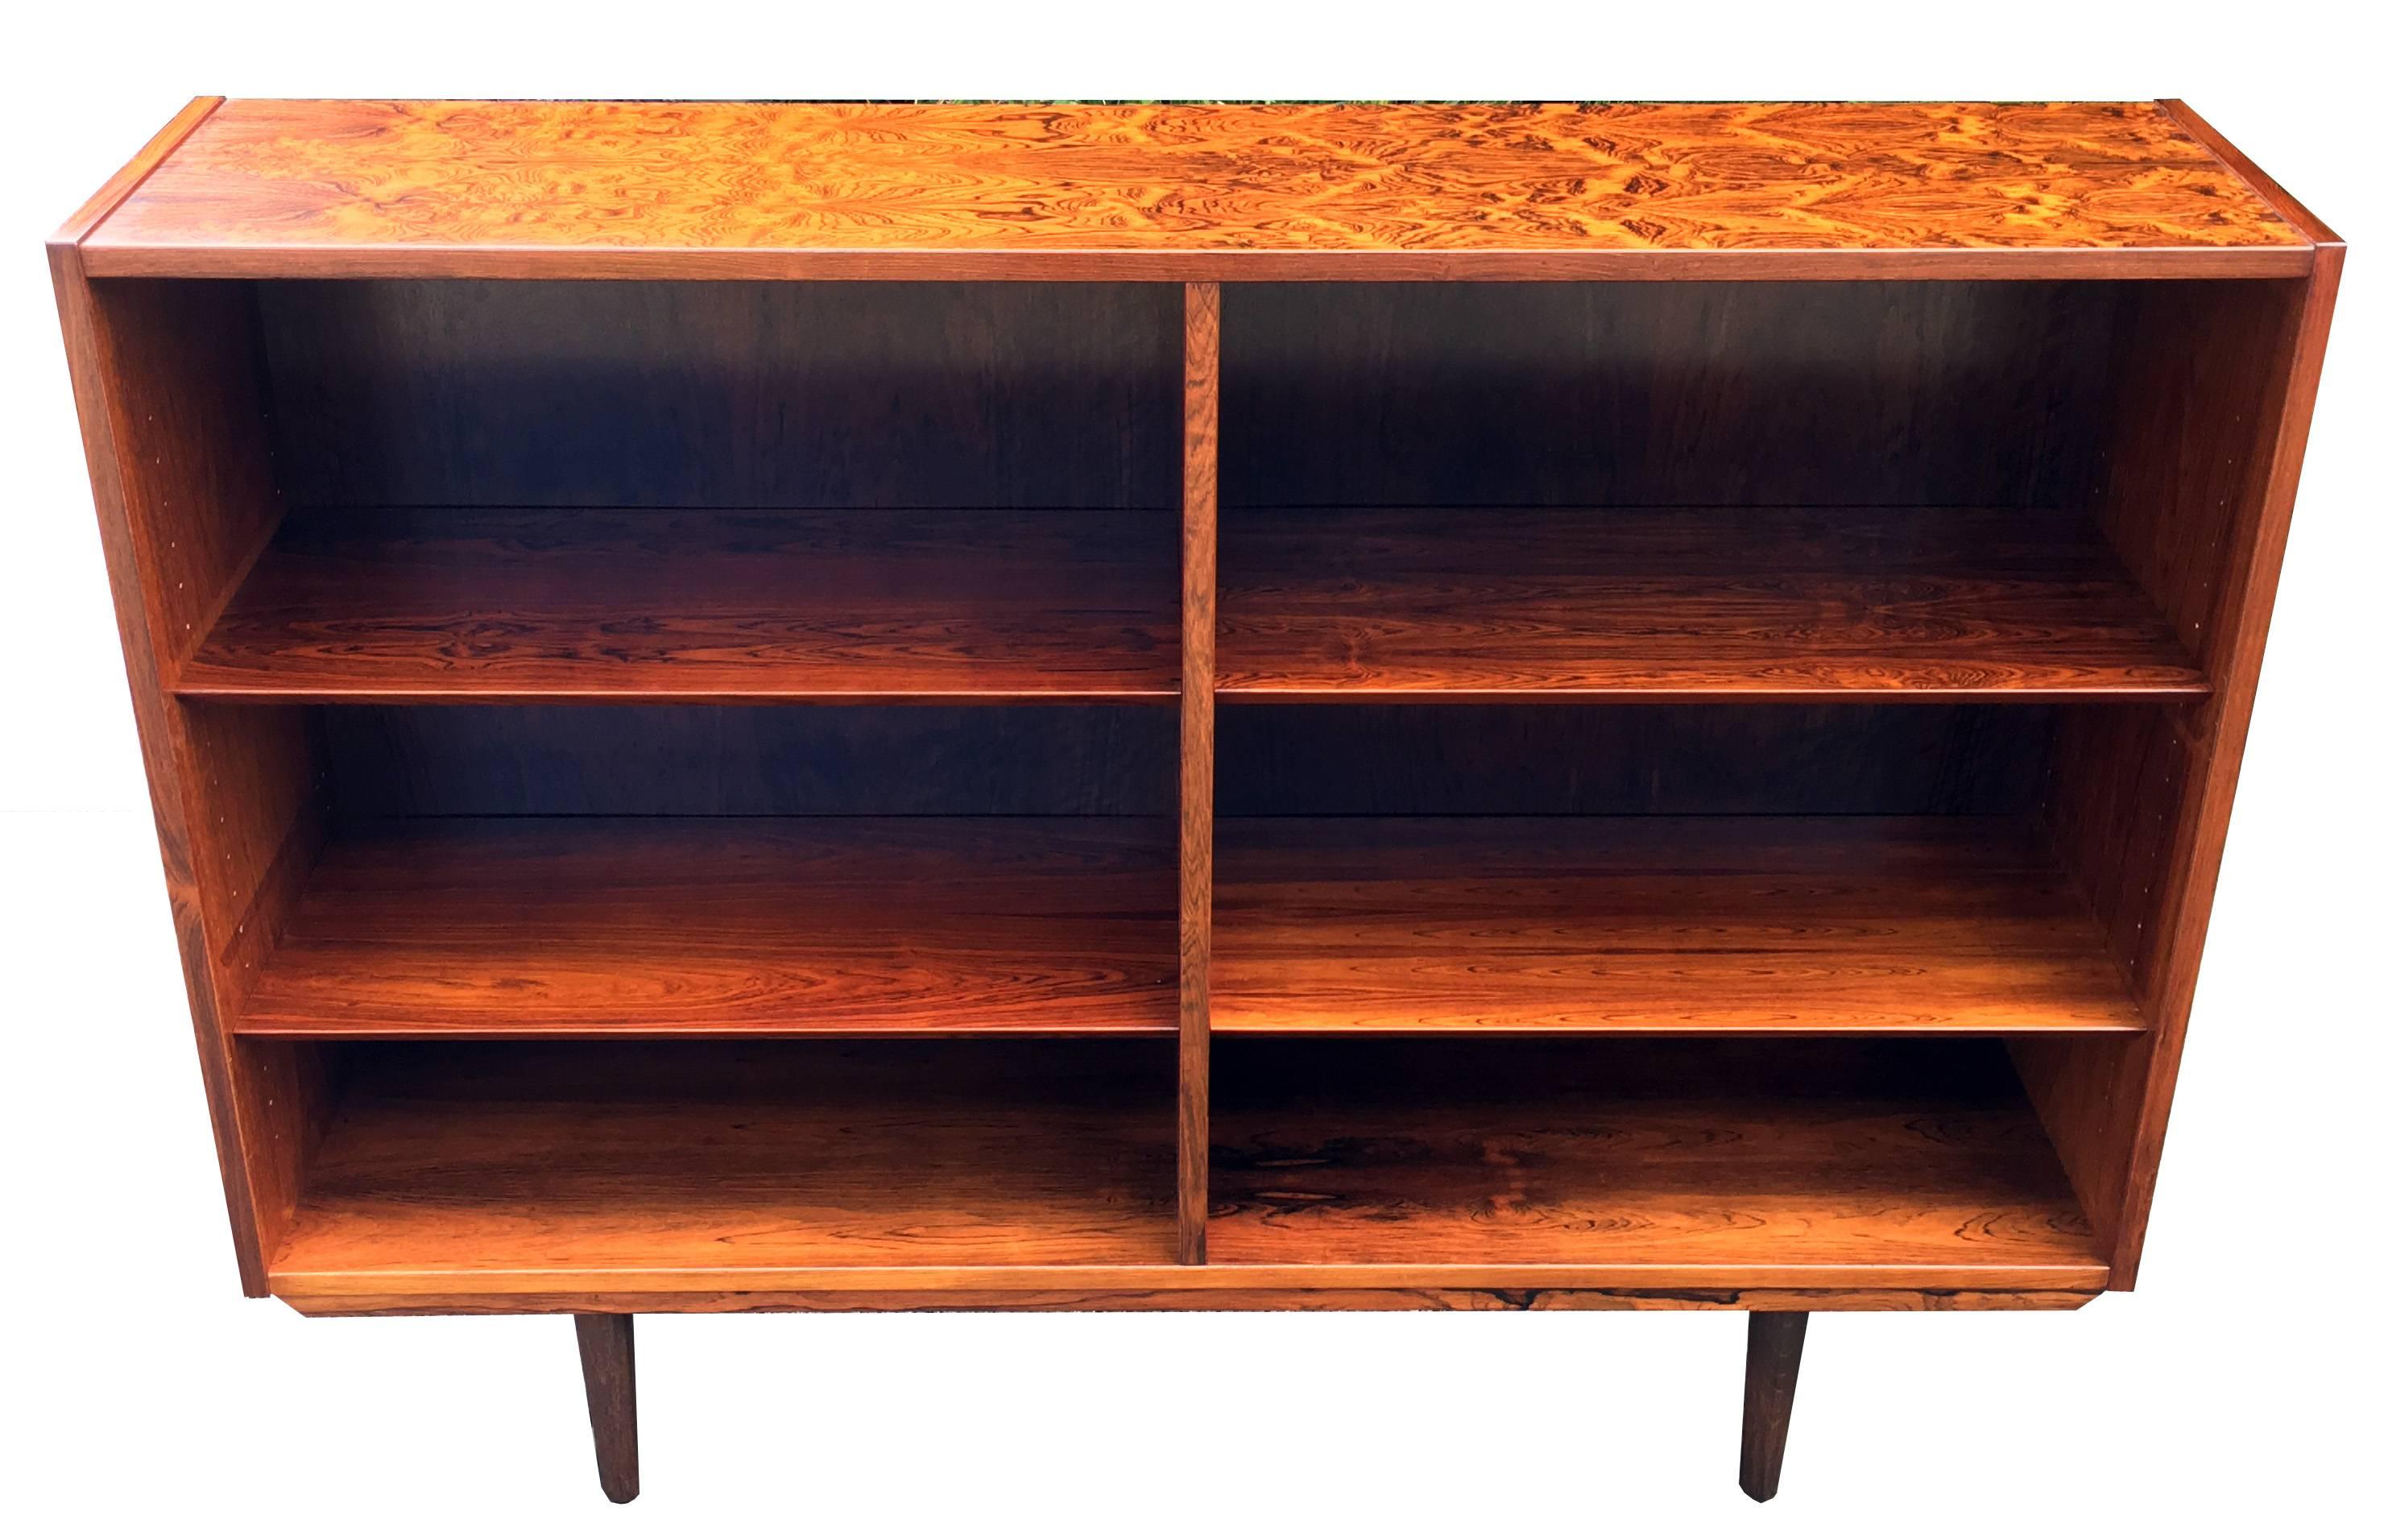 A very nice example of Scandinavian Modern design, this open bookcase has particularly finely marked veneers, and bears all the hallmarks of Poul Hundevad, All shelves can be moved in seconds to any of the predrilled positions as you can see in the